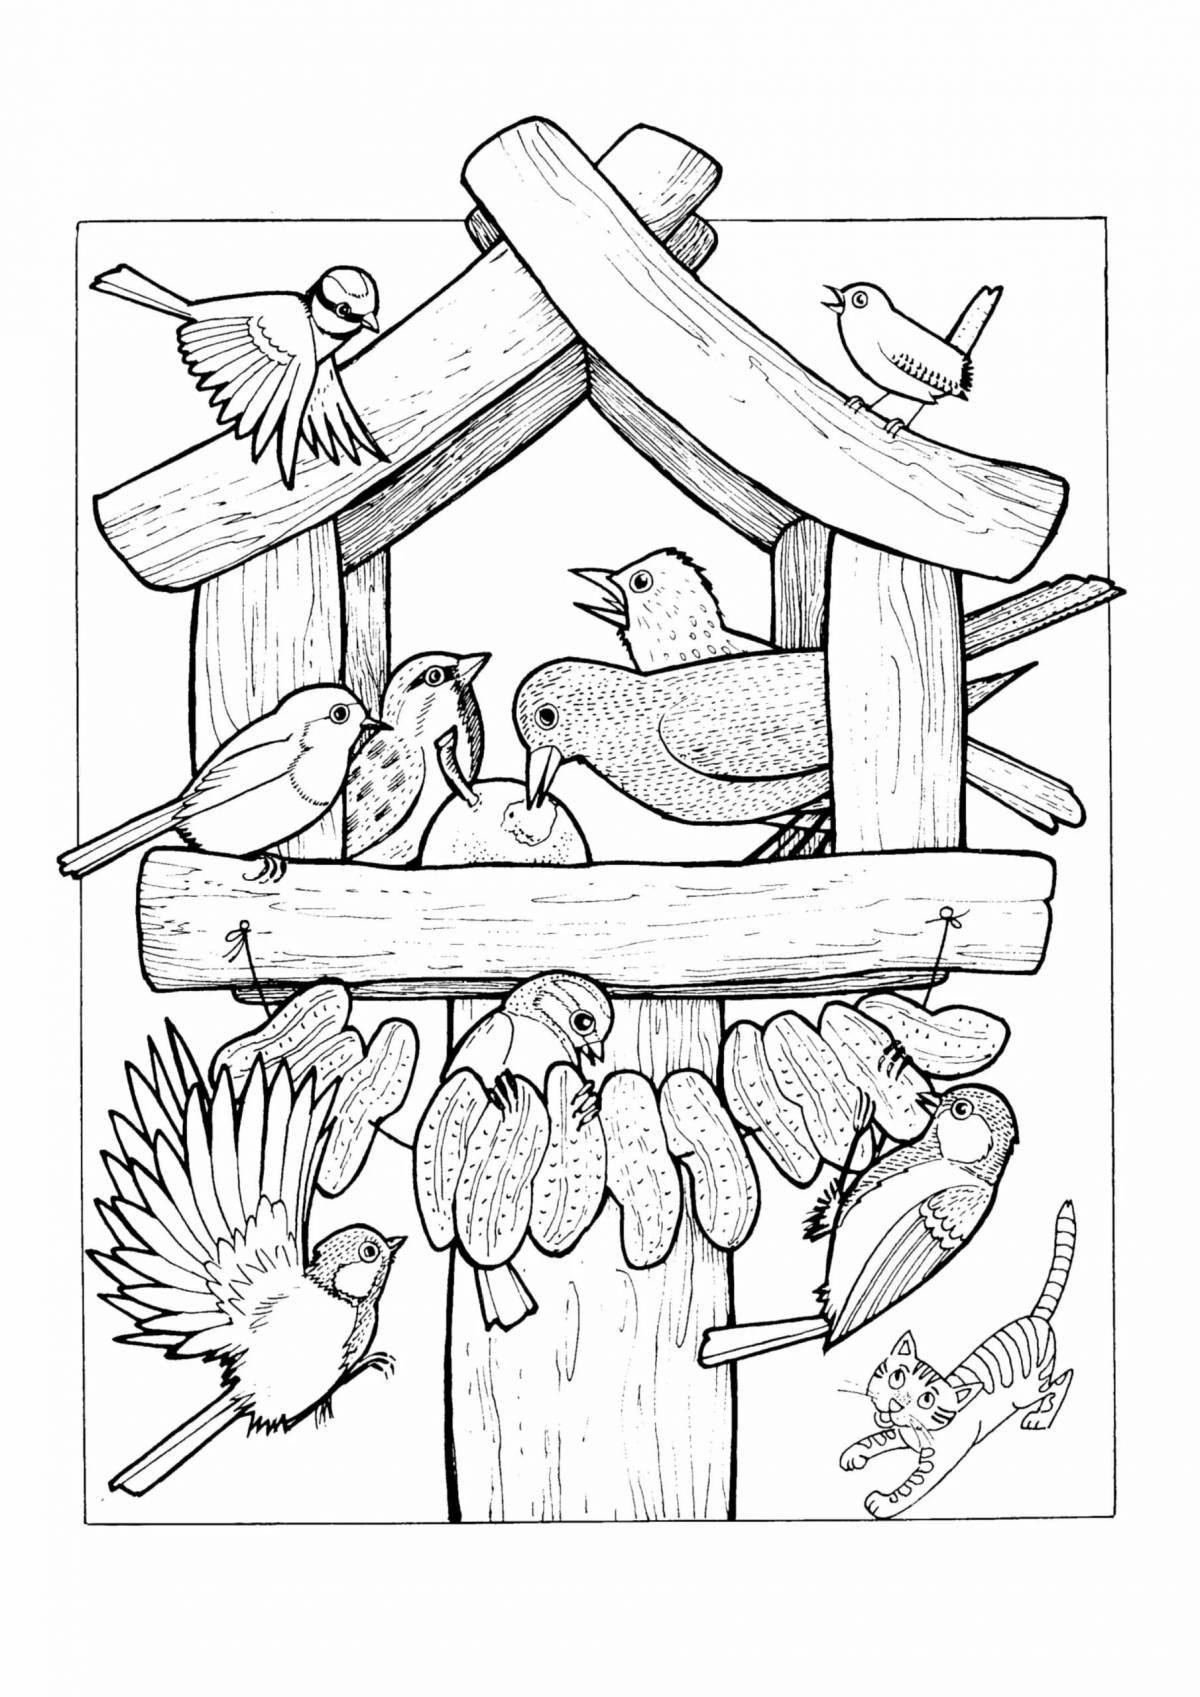 Fun coloring: how to help birds in winter